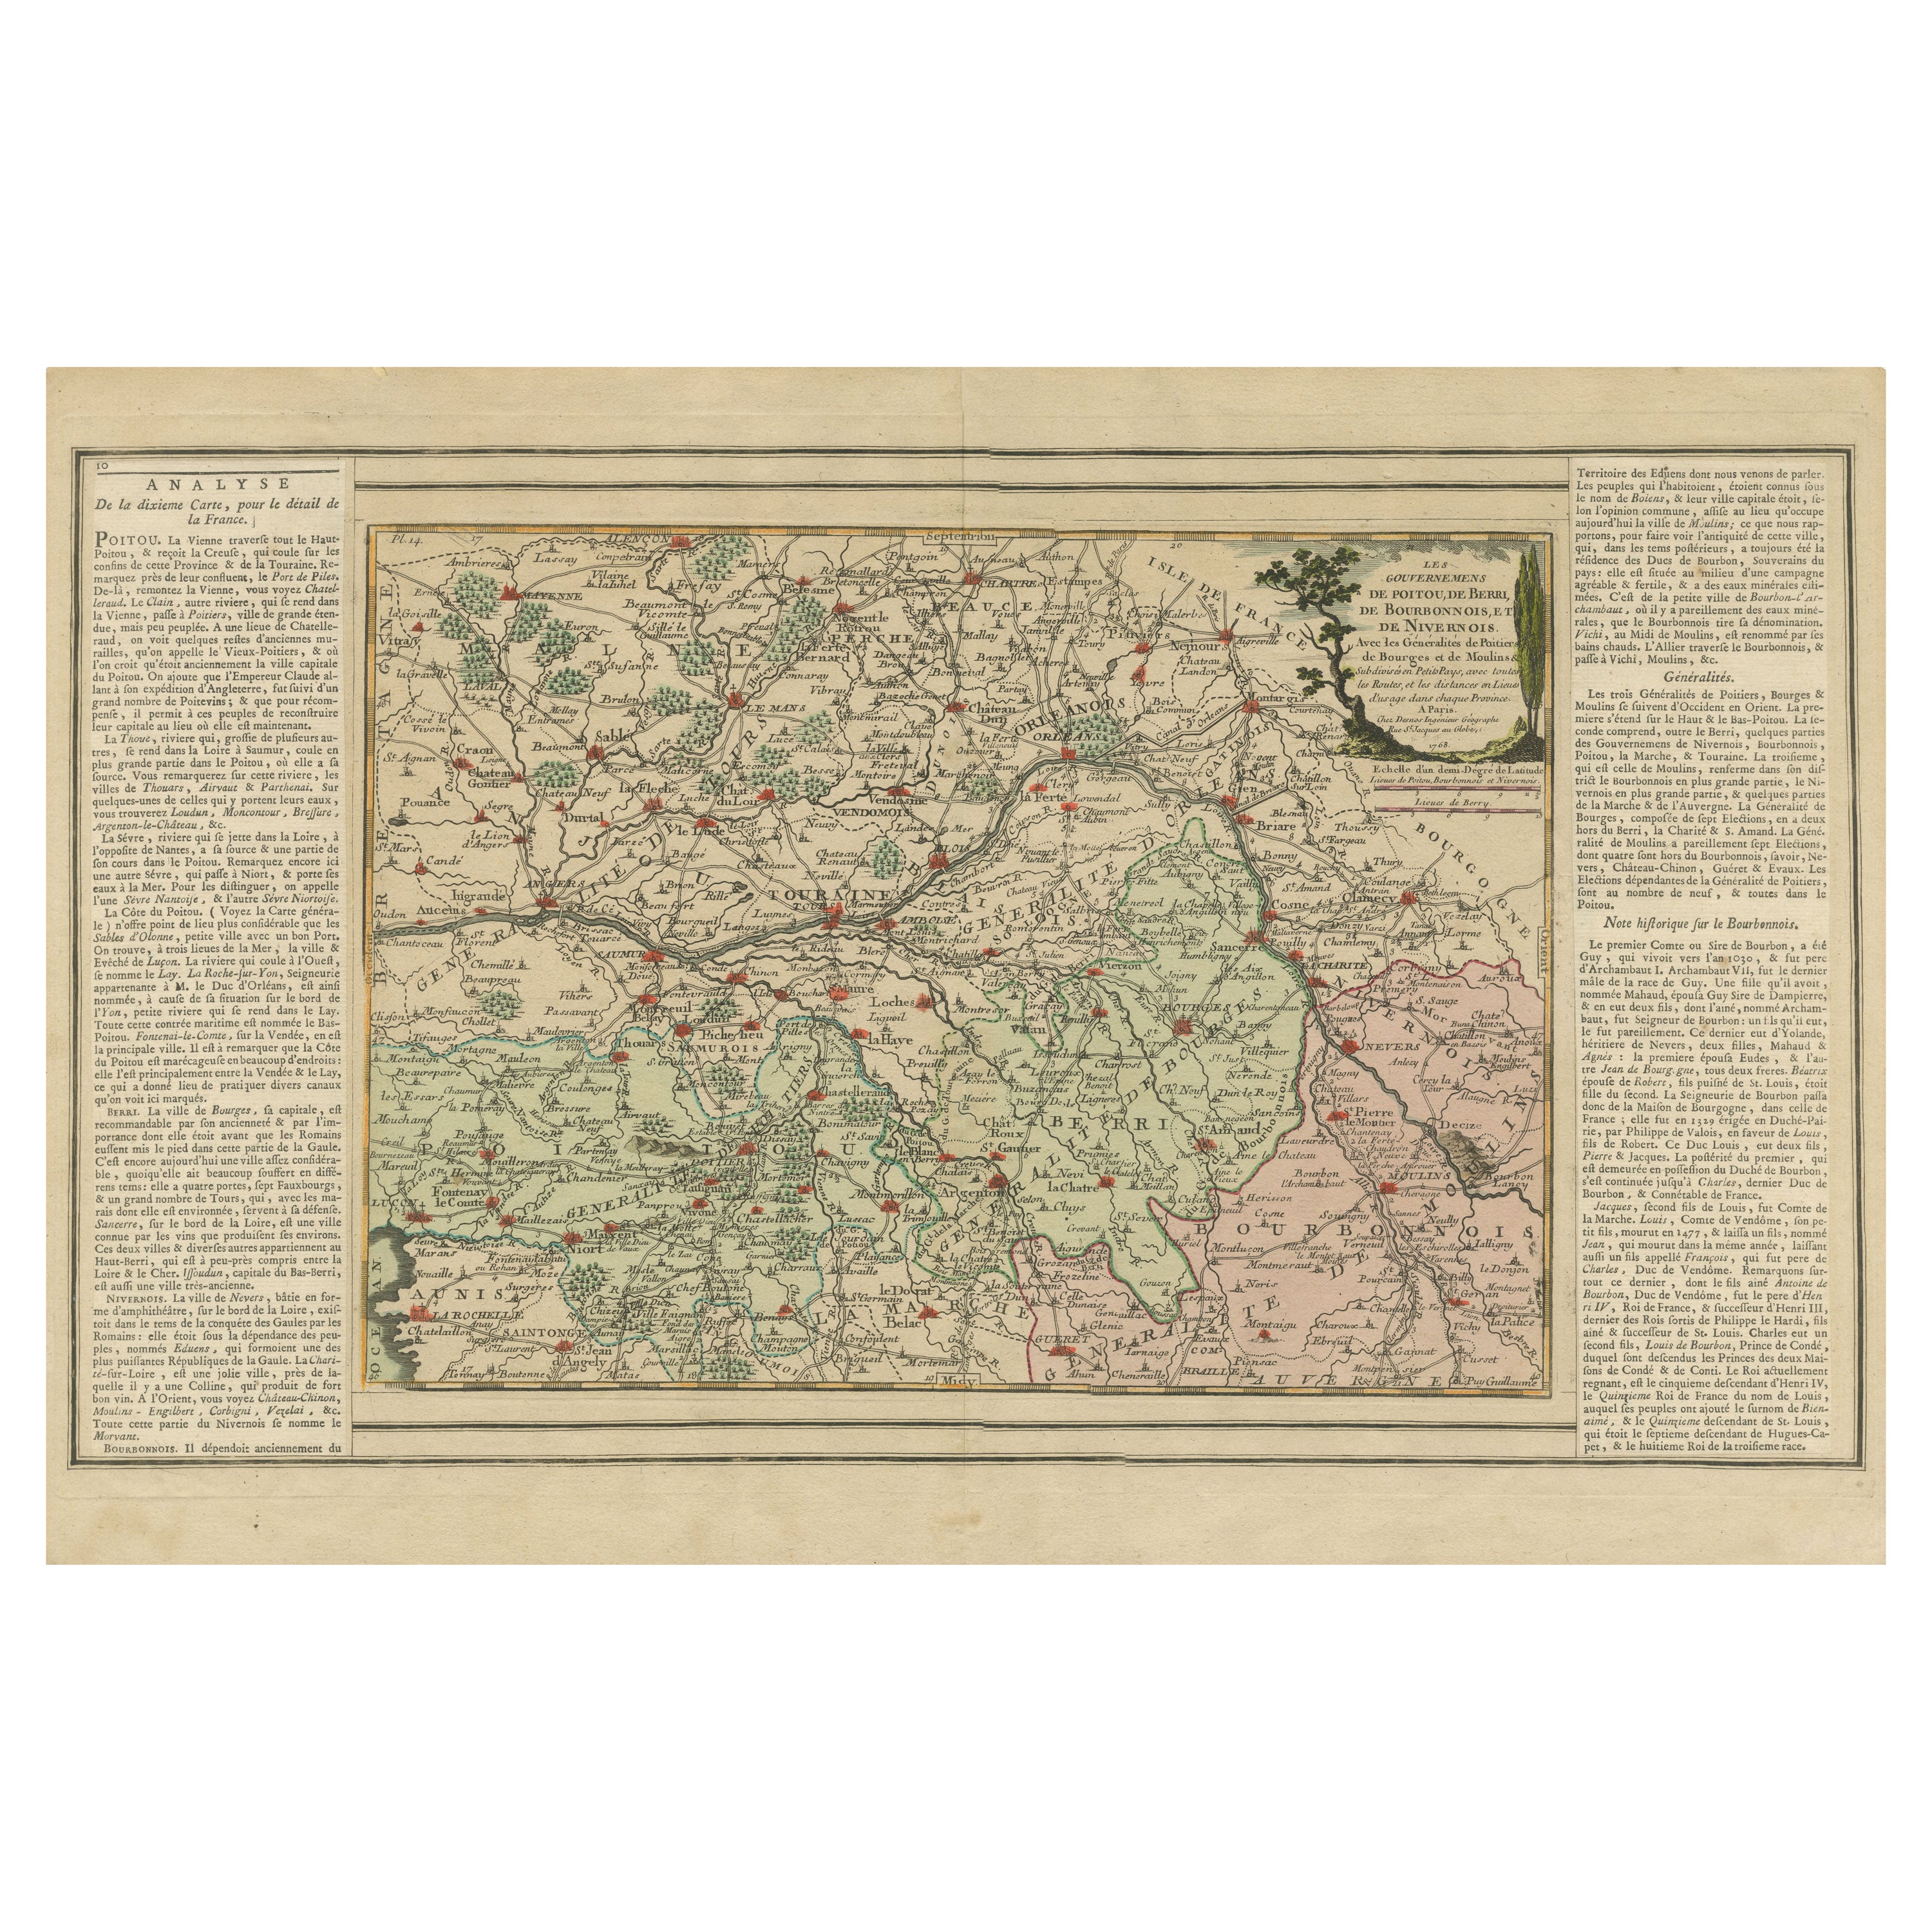 Old Map of Part of France: Poitou, Berry, Bourbonnais, and Nivernais in 1768 For Sale